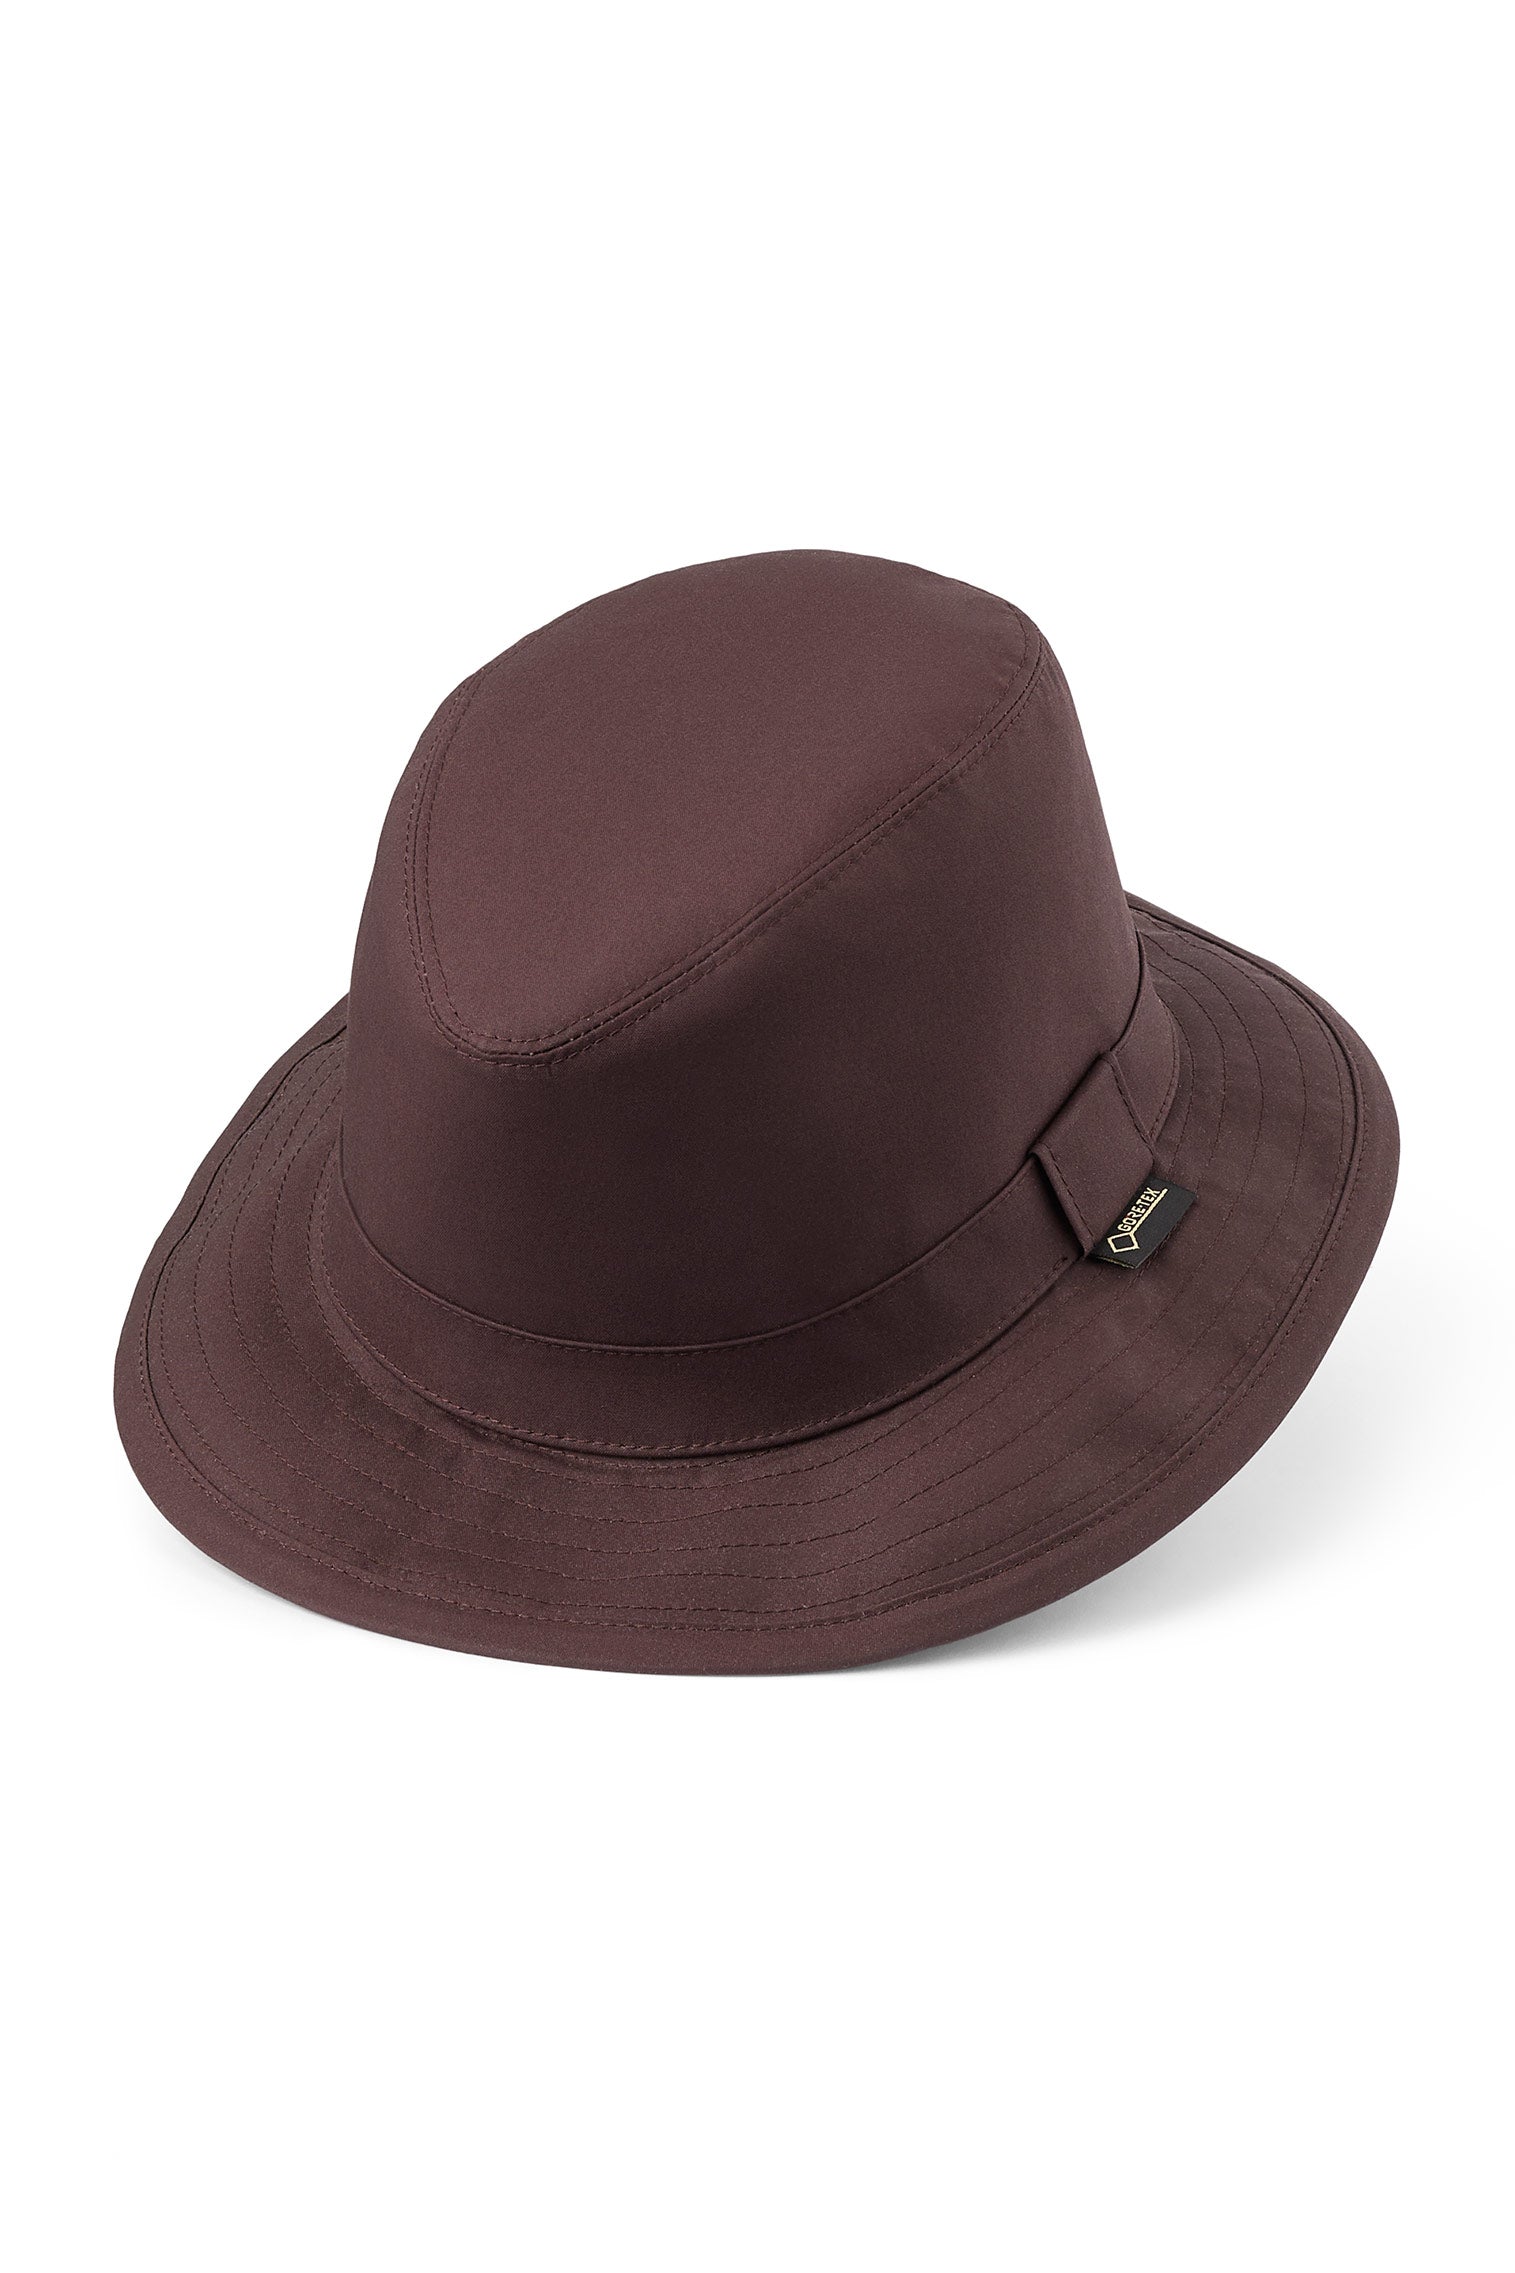 Tay GORE-TEX Hat - Hats for Oval Face Shapes - Lock & Co. Hatters London UK